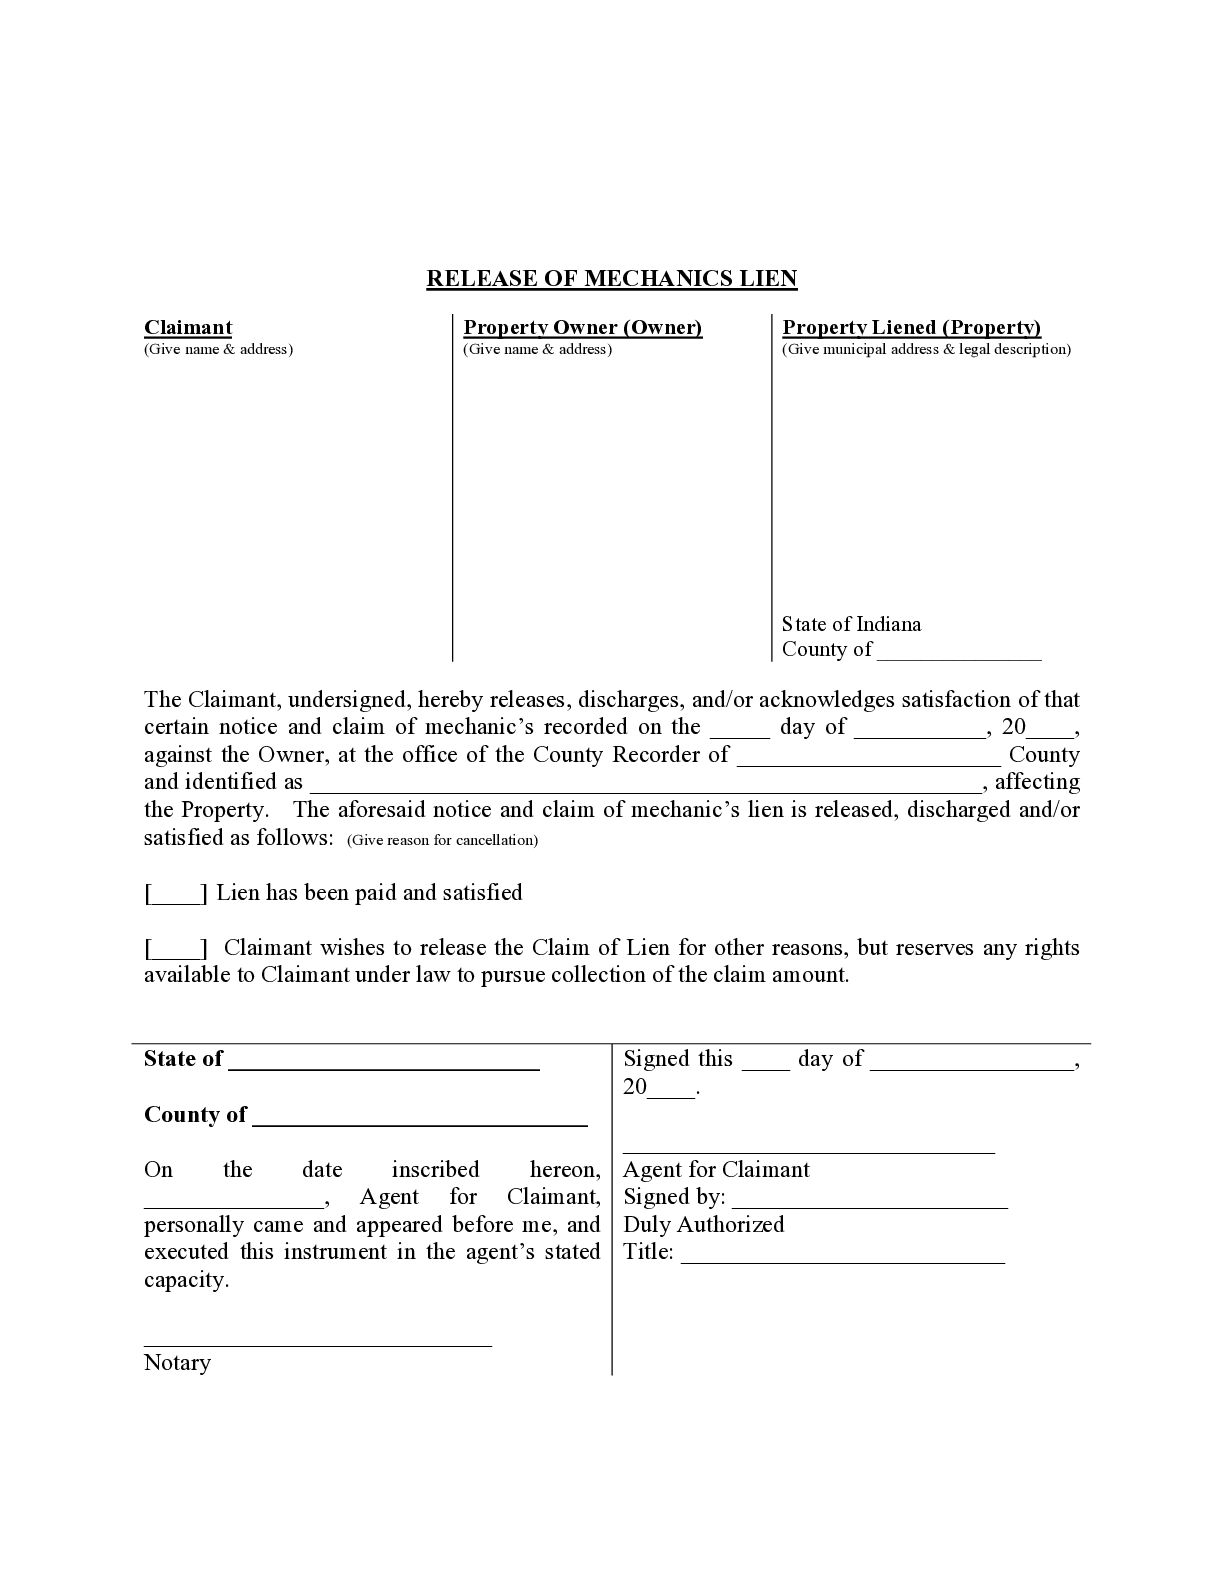 Indiana Mechanics Lien Release Form - free from